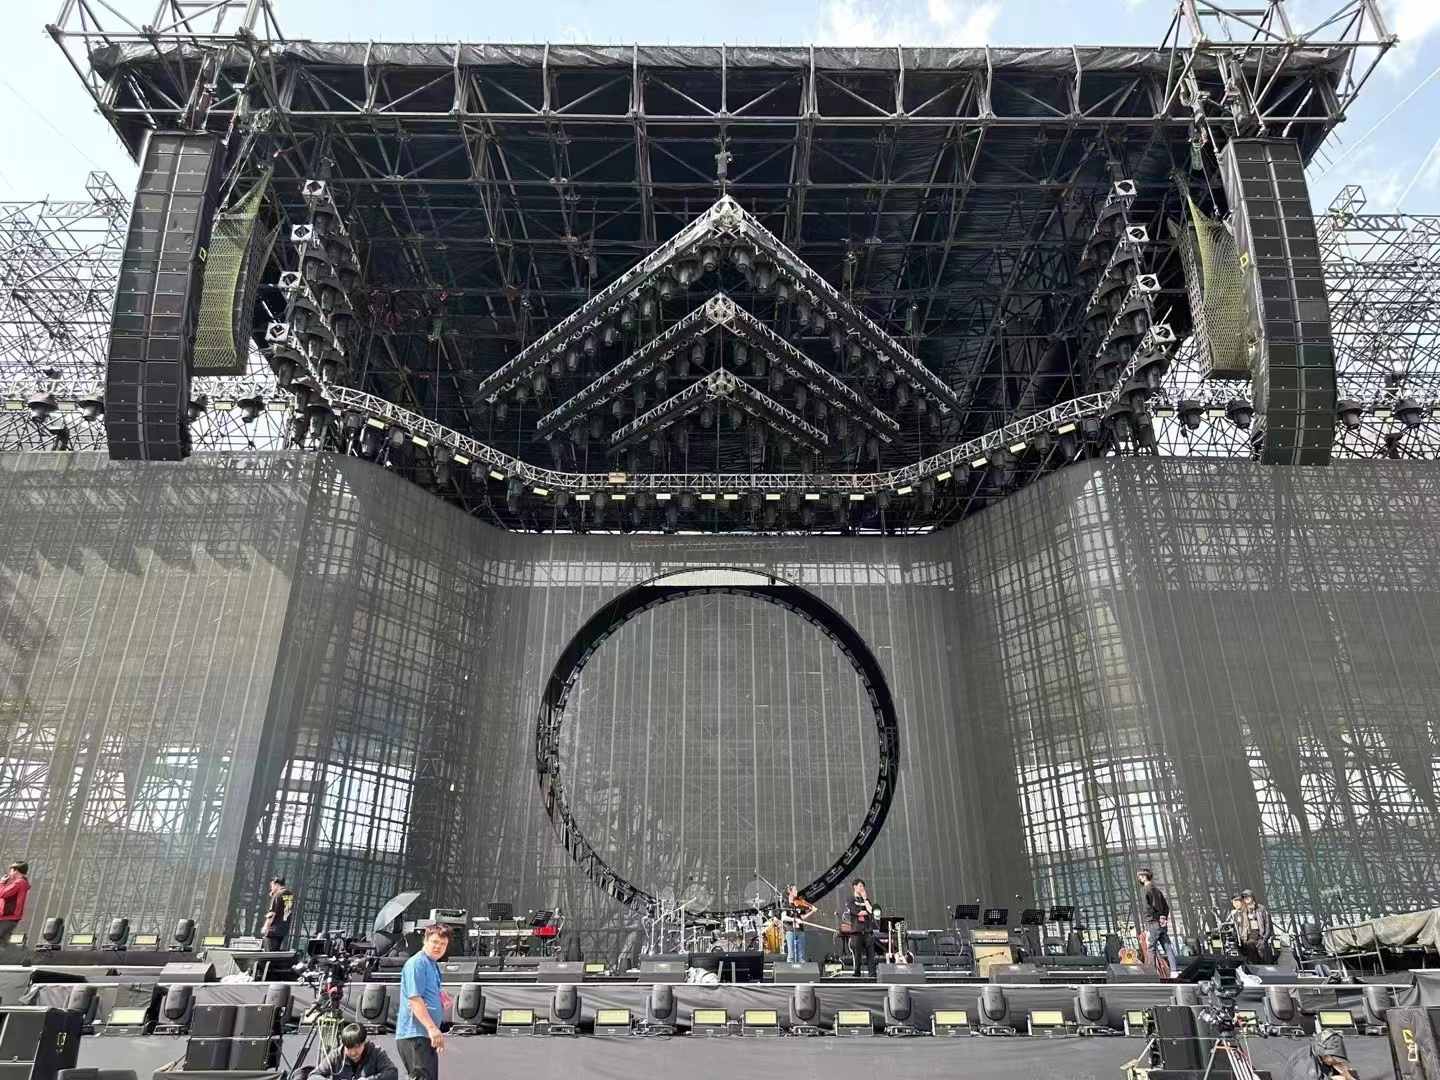 Showtechled LED transparent screen/rental screen P3.91×7.81: the best choice for outdoor large-scale events and star stage performances